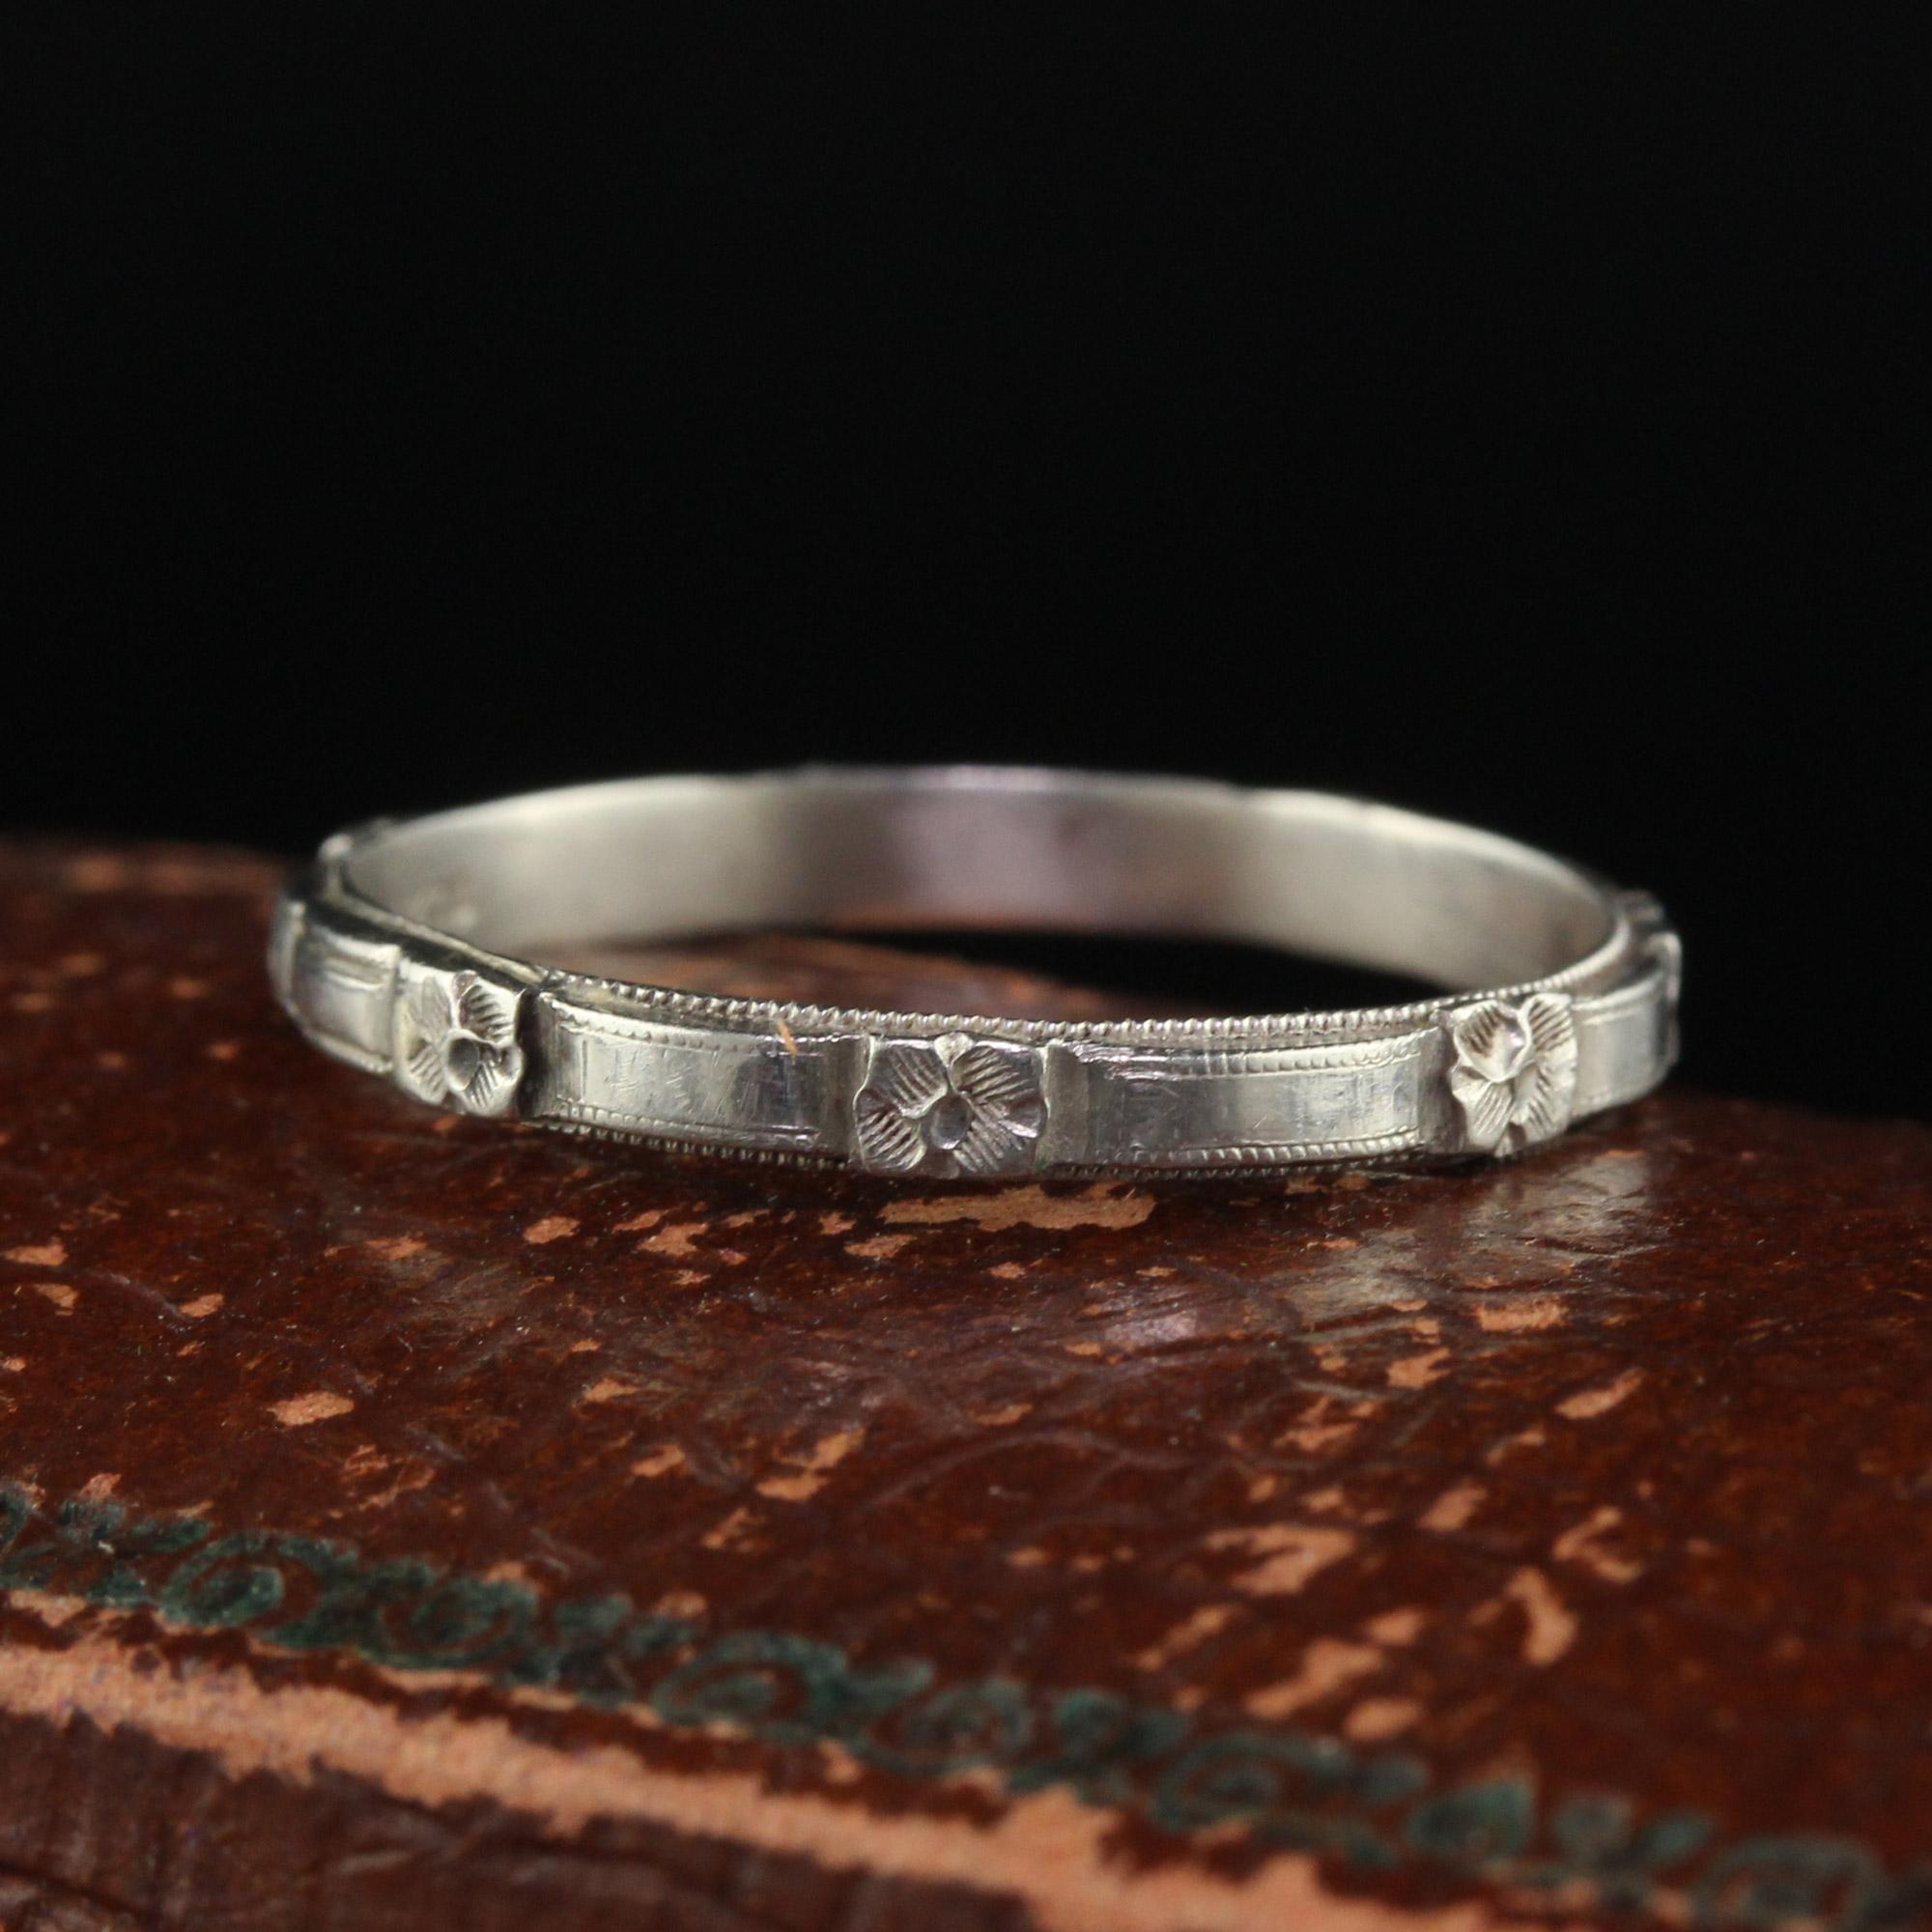 Beautiful Antique Art Deco Platinum Blossom Engraved Wedding Band - Size 8. This beautiful wedding band is crafted in platinum. There are crisp engravings of a blossom design going around the band and it is in great condition. The ring sits low on